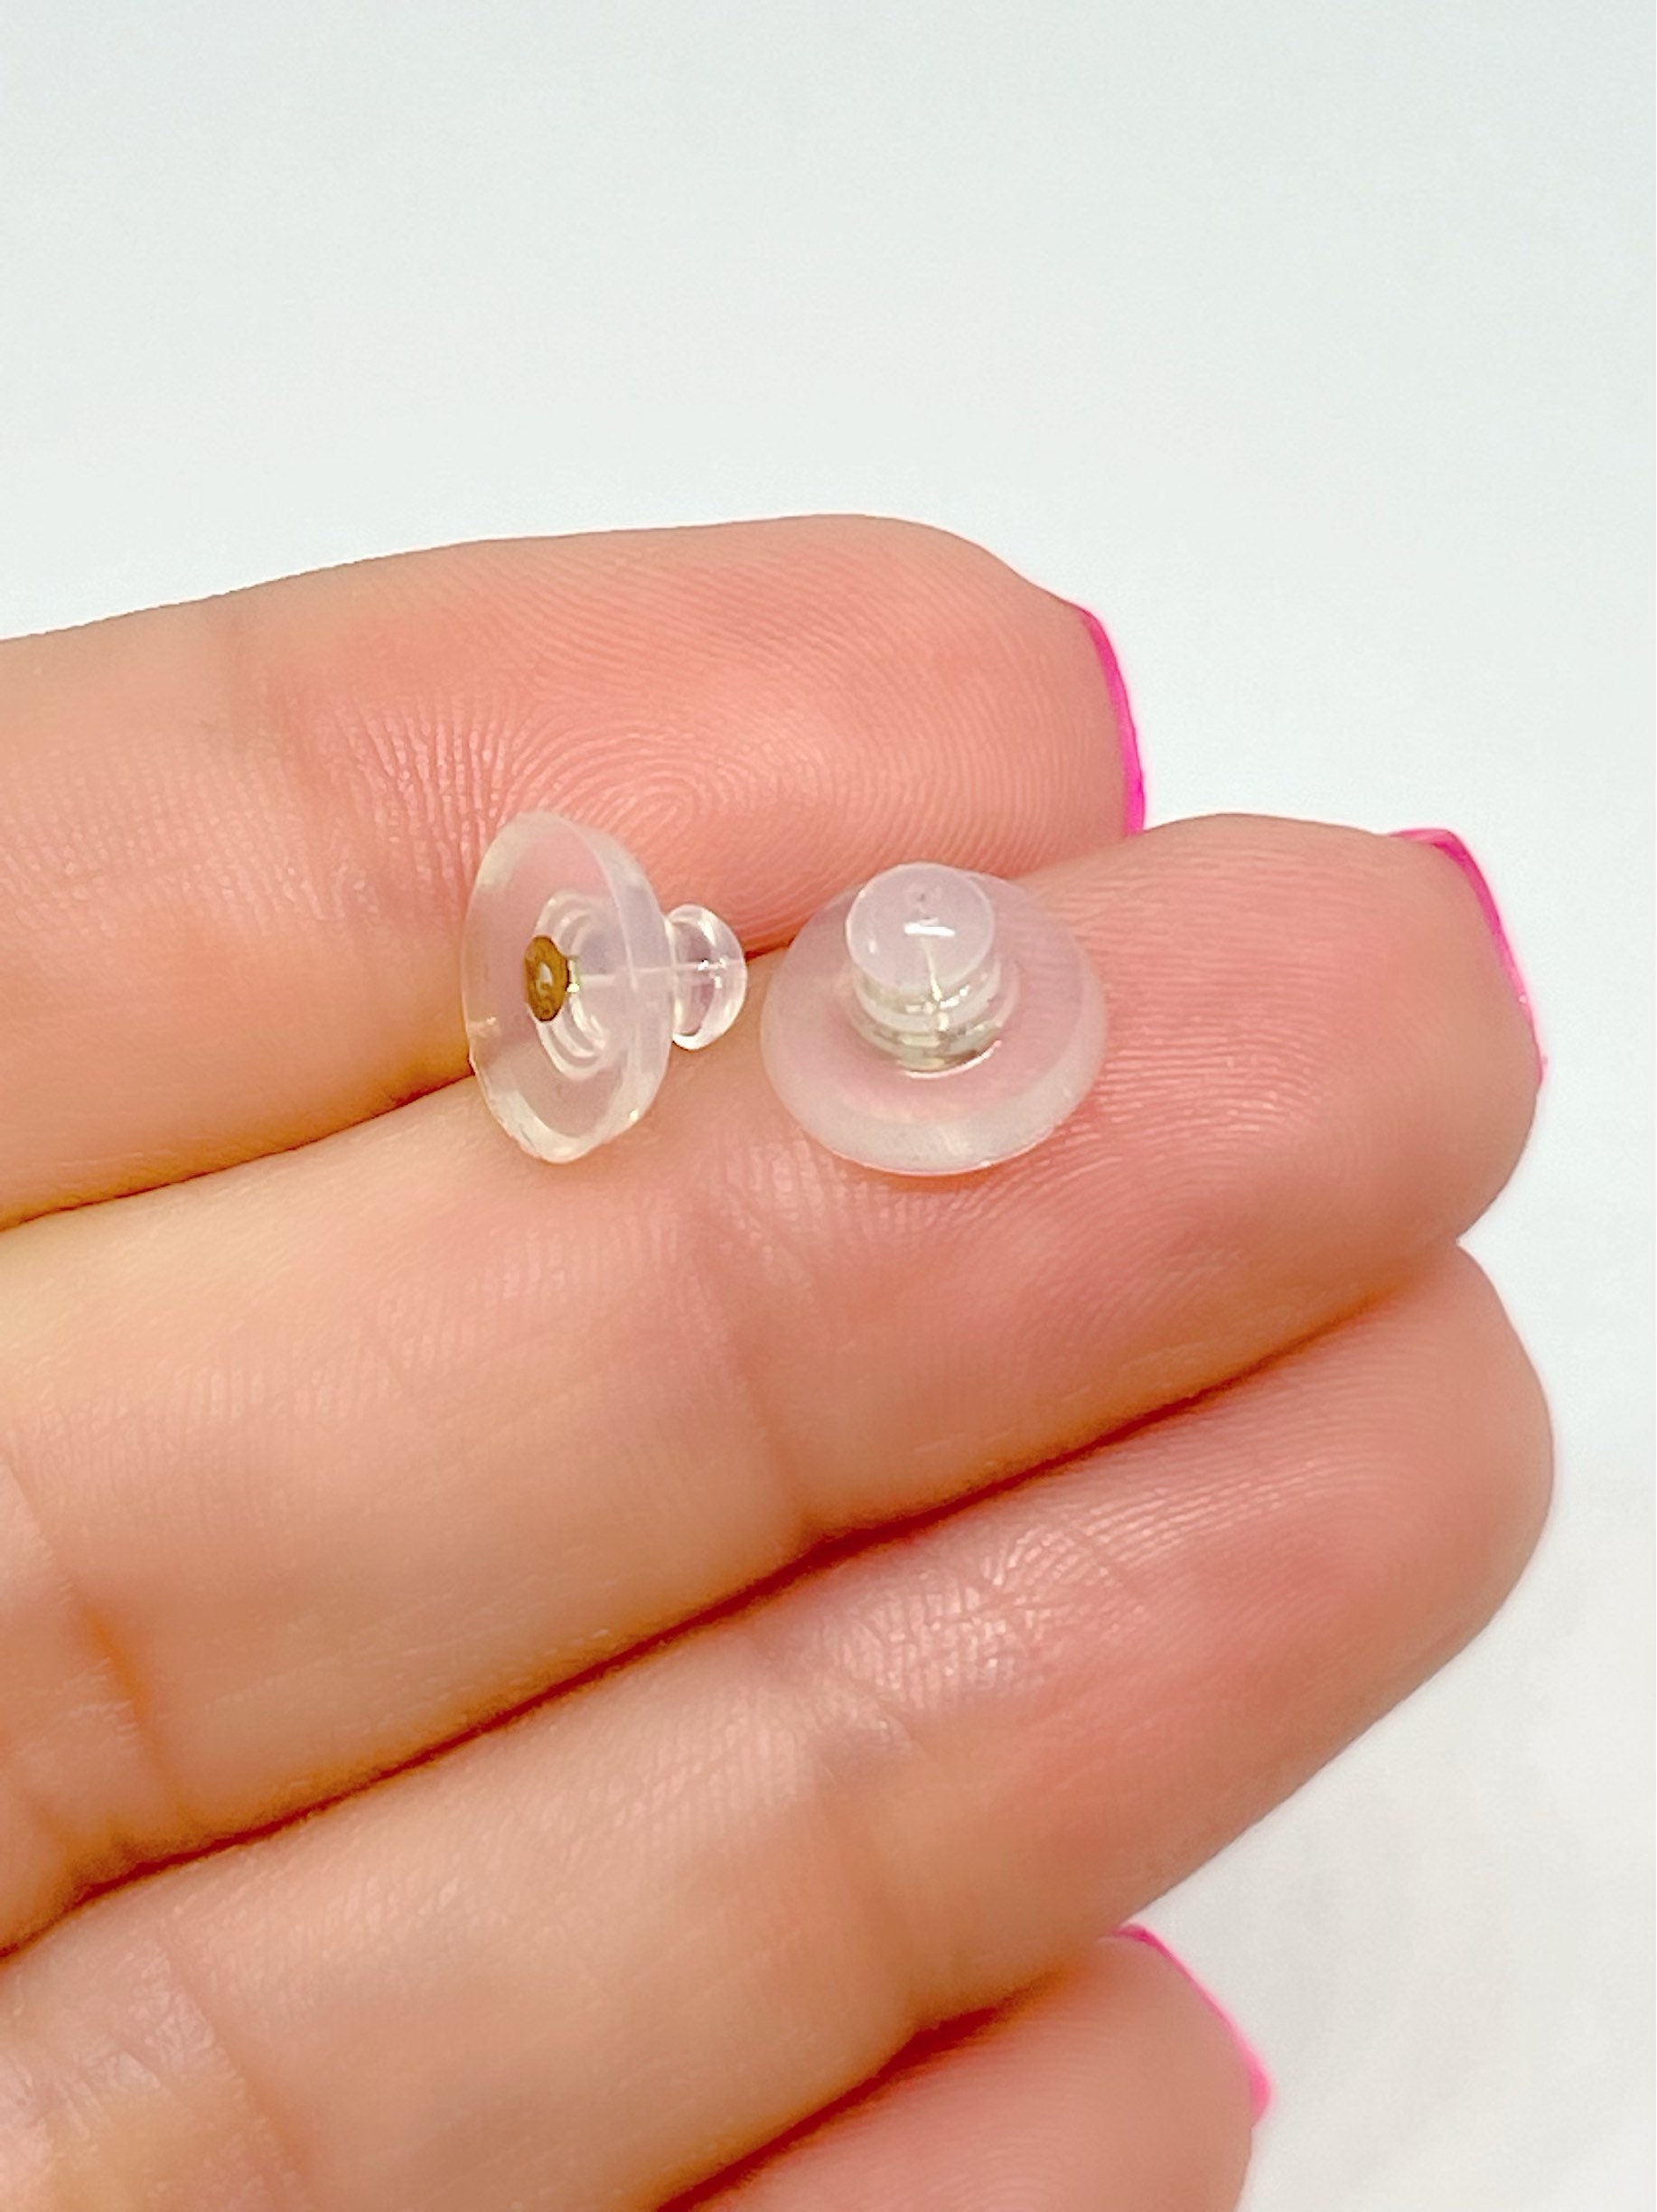  Safety Earring Backs For Studs, Silver Screw On Earring  Backings Replacement